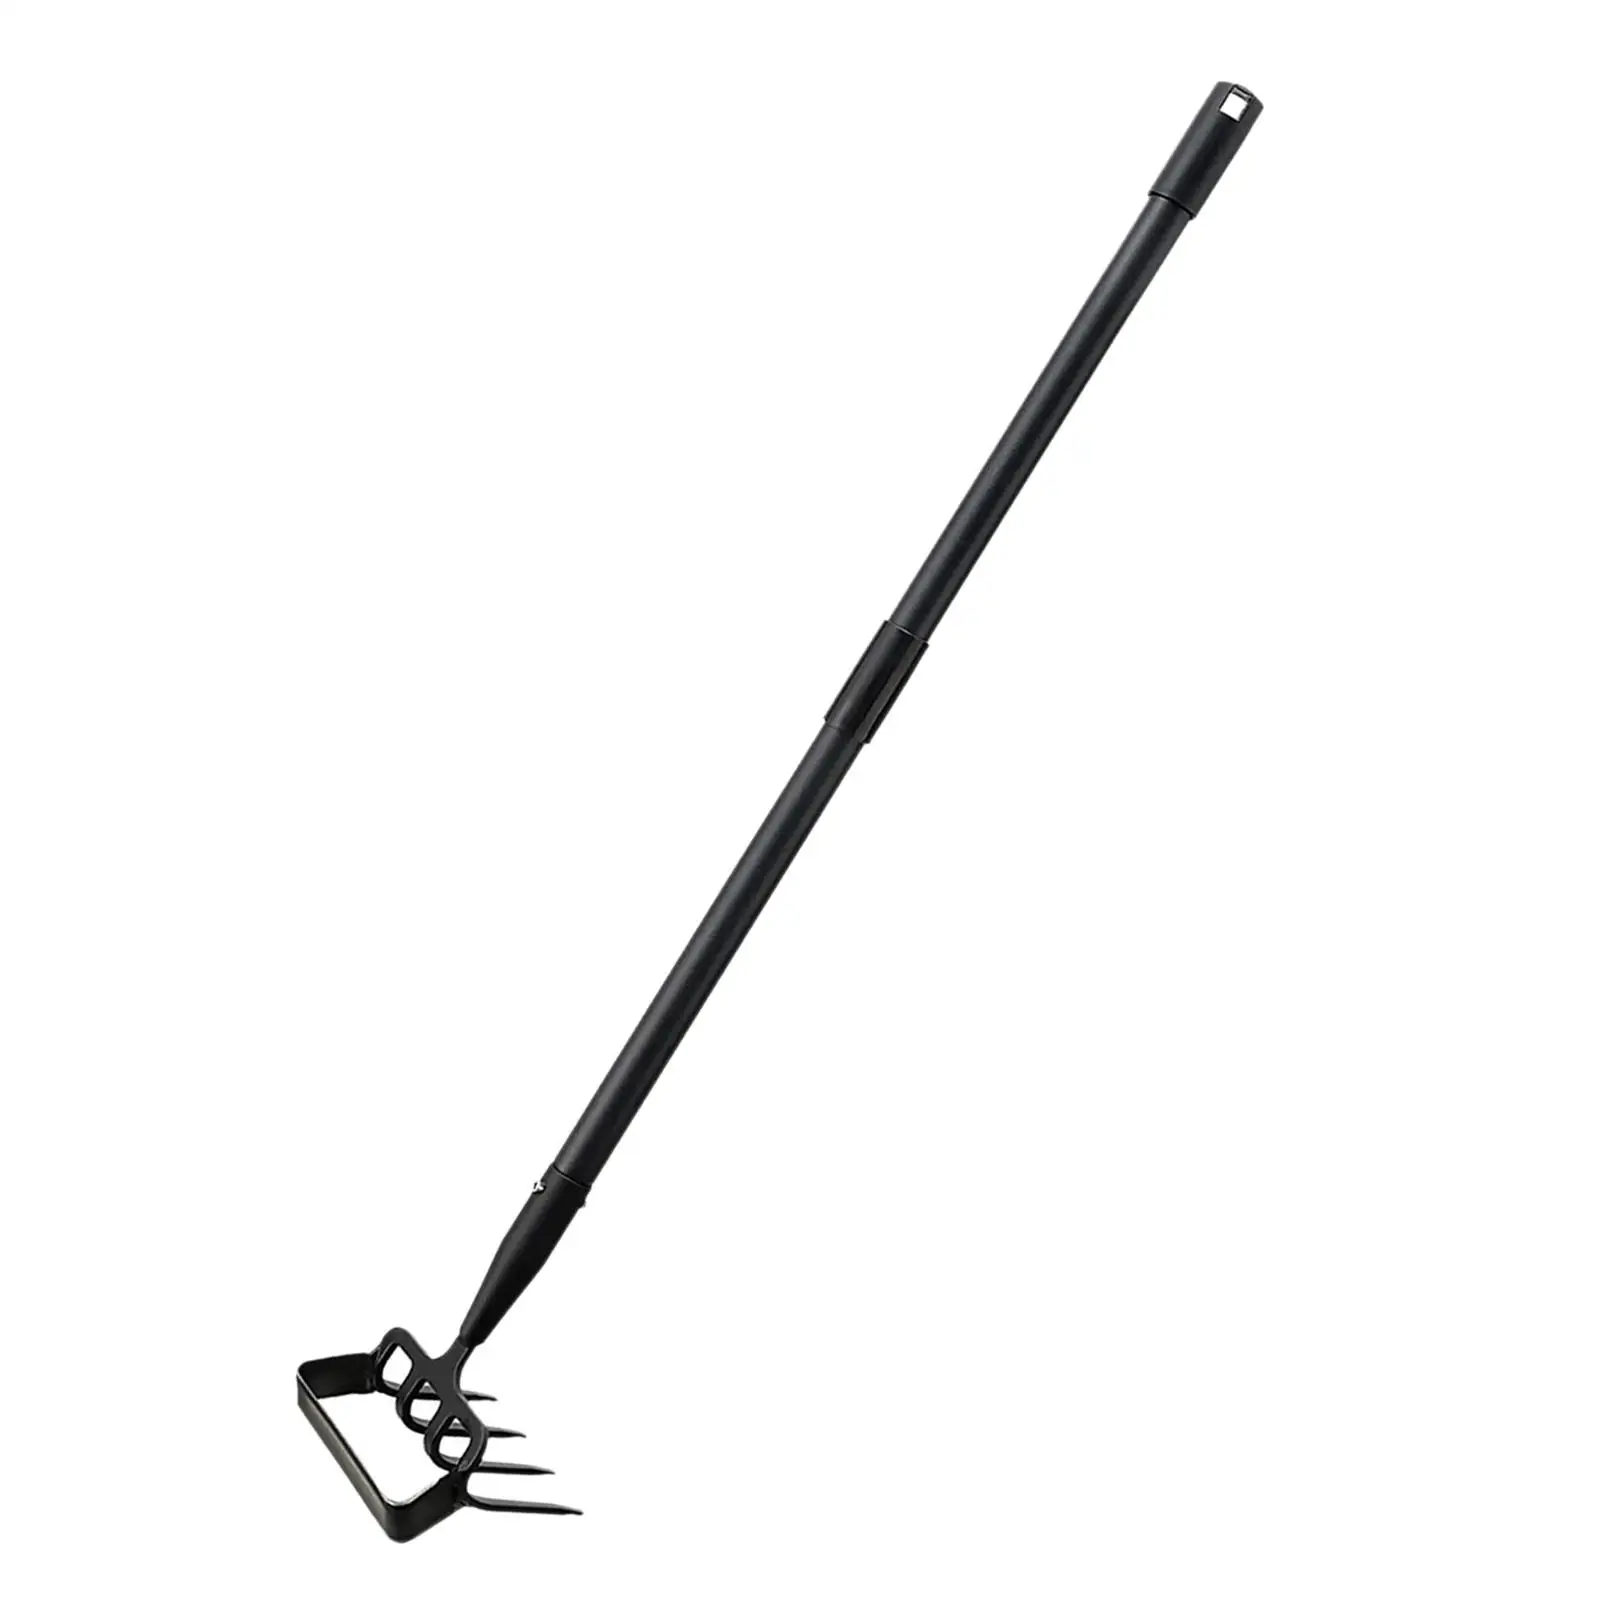 Stirrup Hoe and Cultivator 2 in 1 Weeding Artifact Lightweight Hoe Garden Tool for Weeding Plowing Vegetable Lawn Gardening